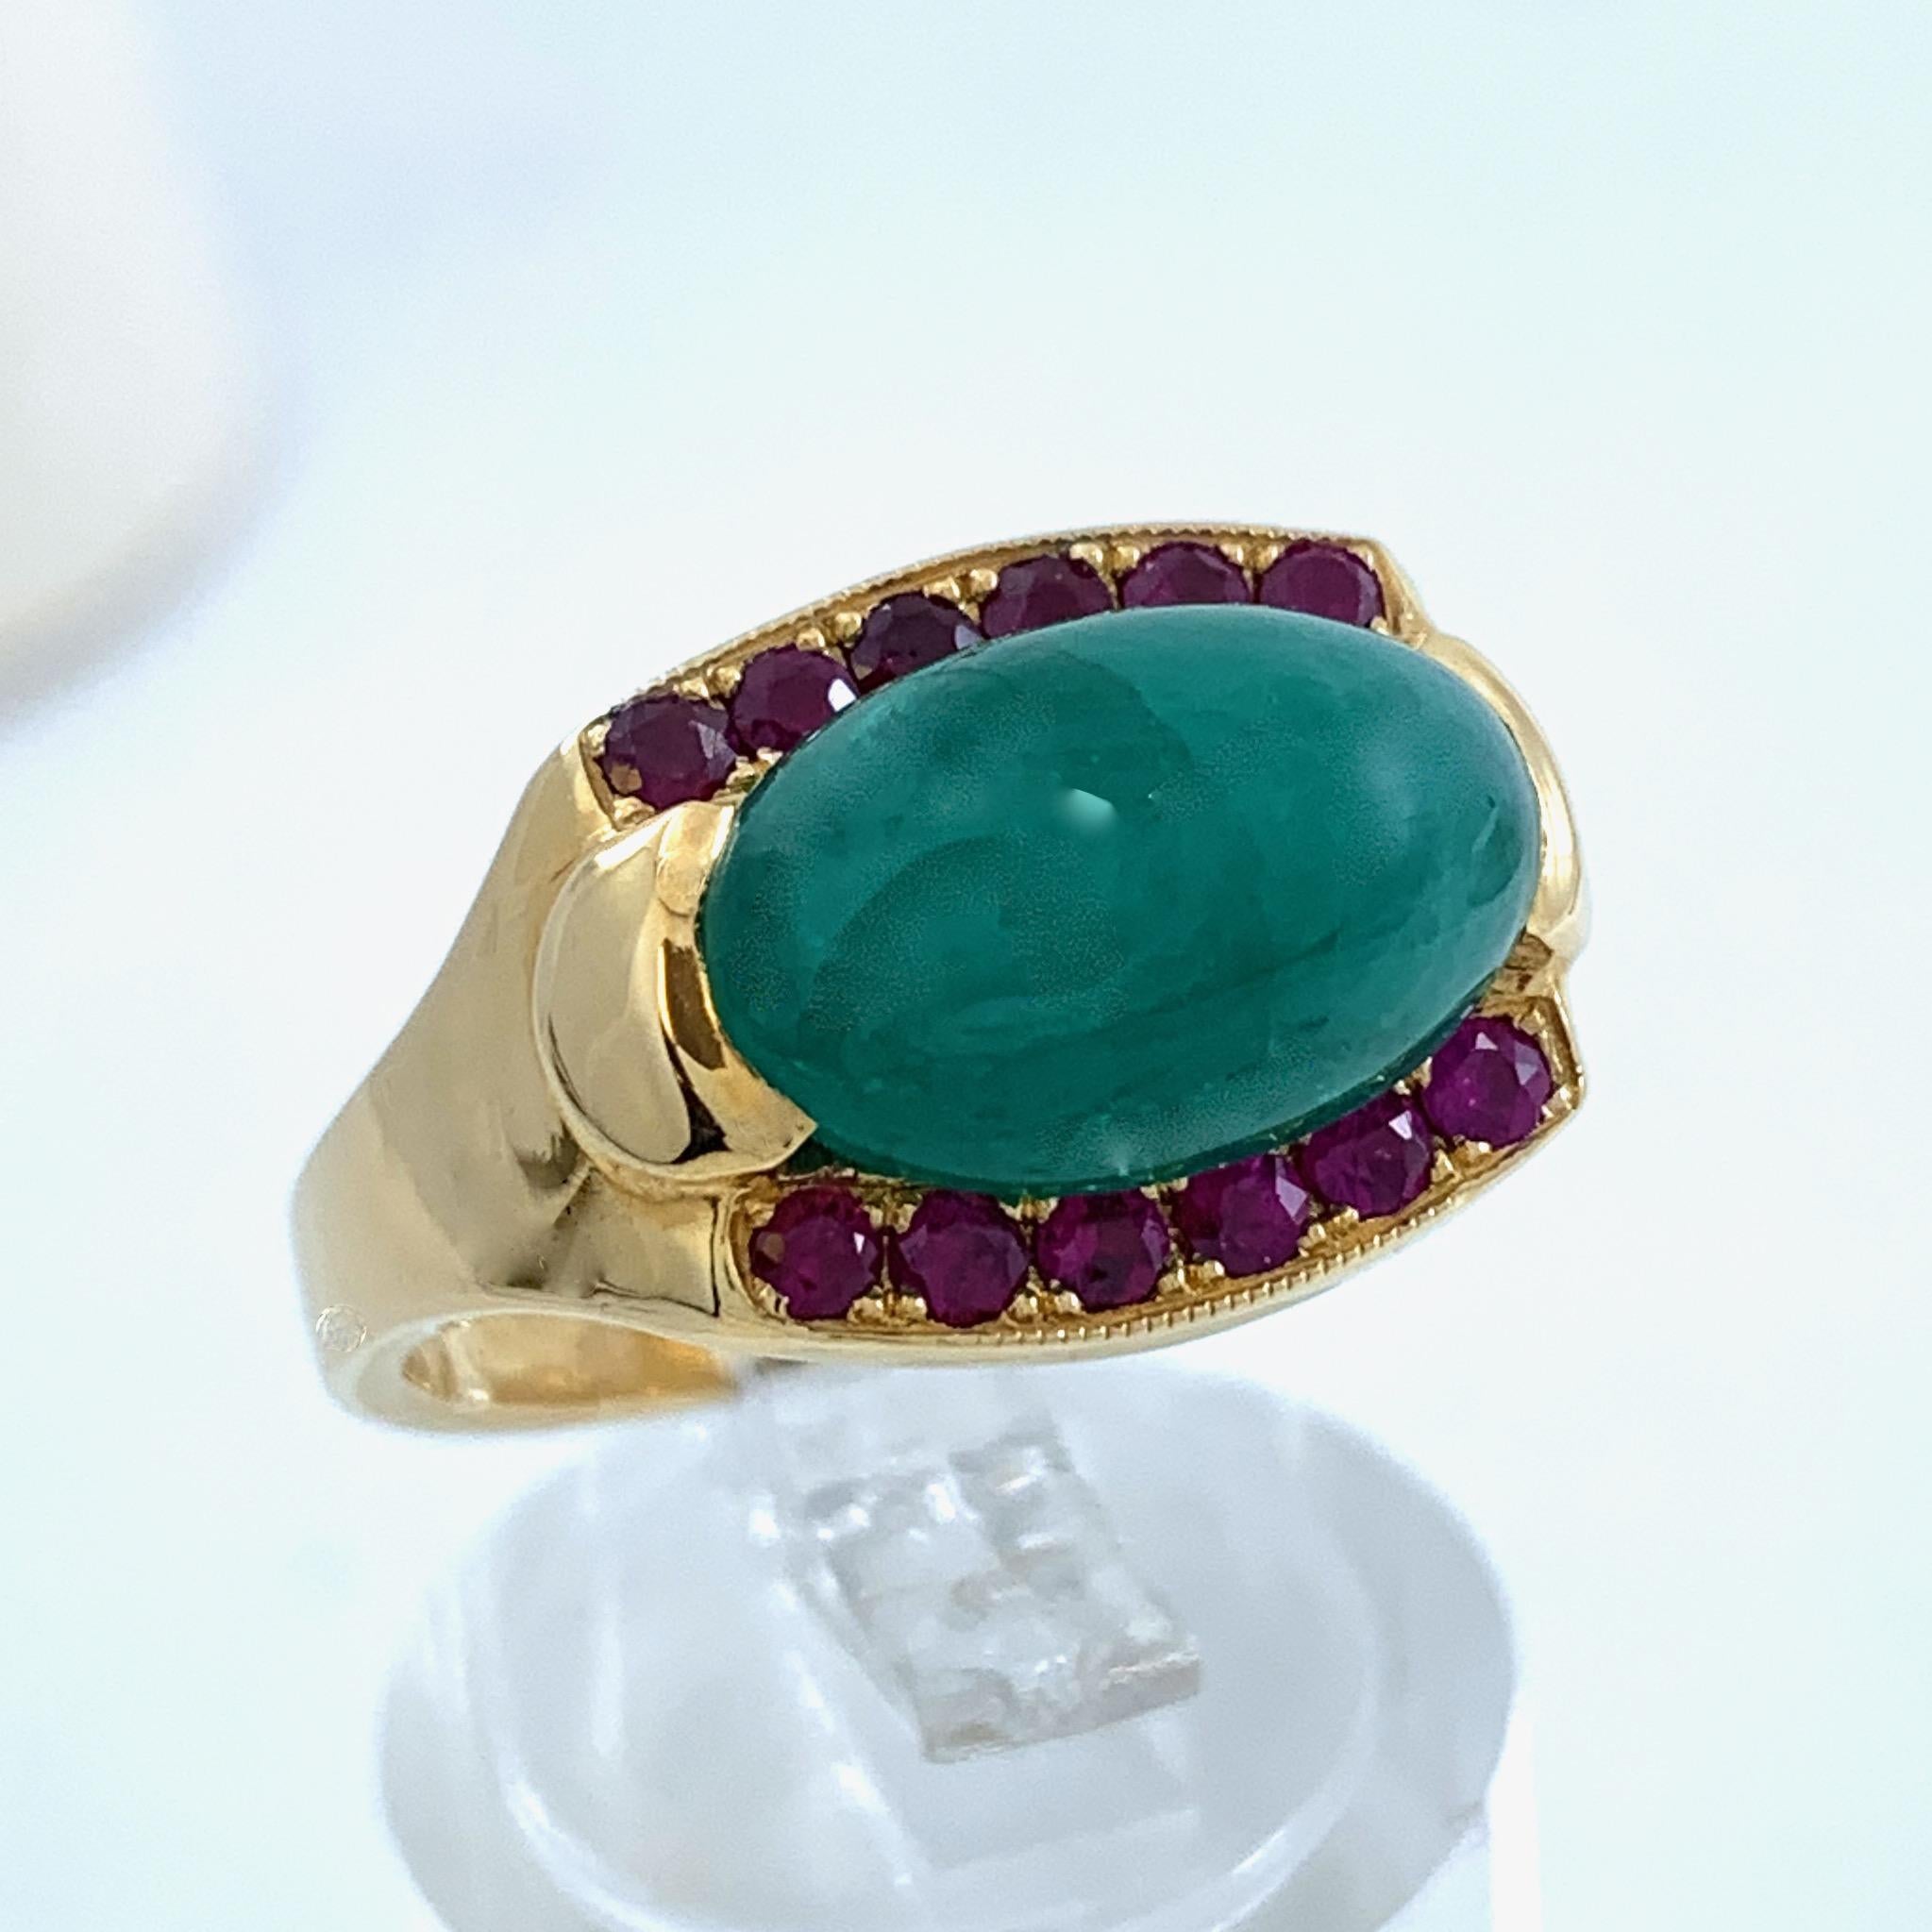 All jewelers have a gem box where they toss stray stones.  After 47 years, Eytan Brandes has a really, really big gem box.  More like a gem crate.  

This scrumptious ring features an interesting green stone from the gem crate; it's some sort of